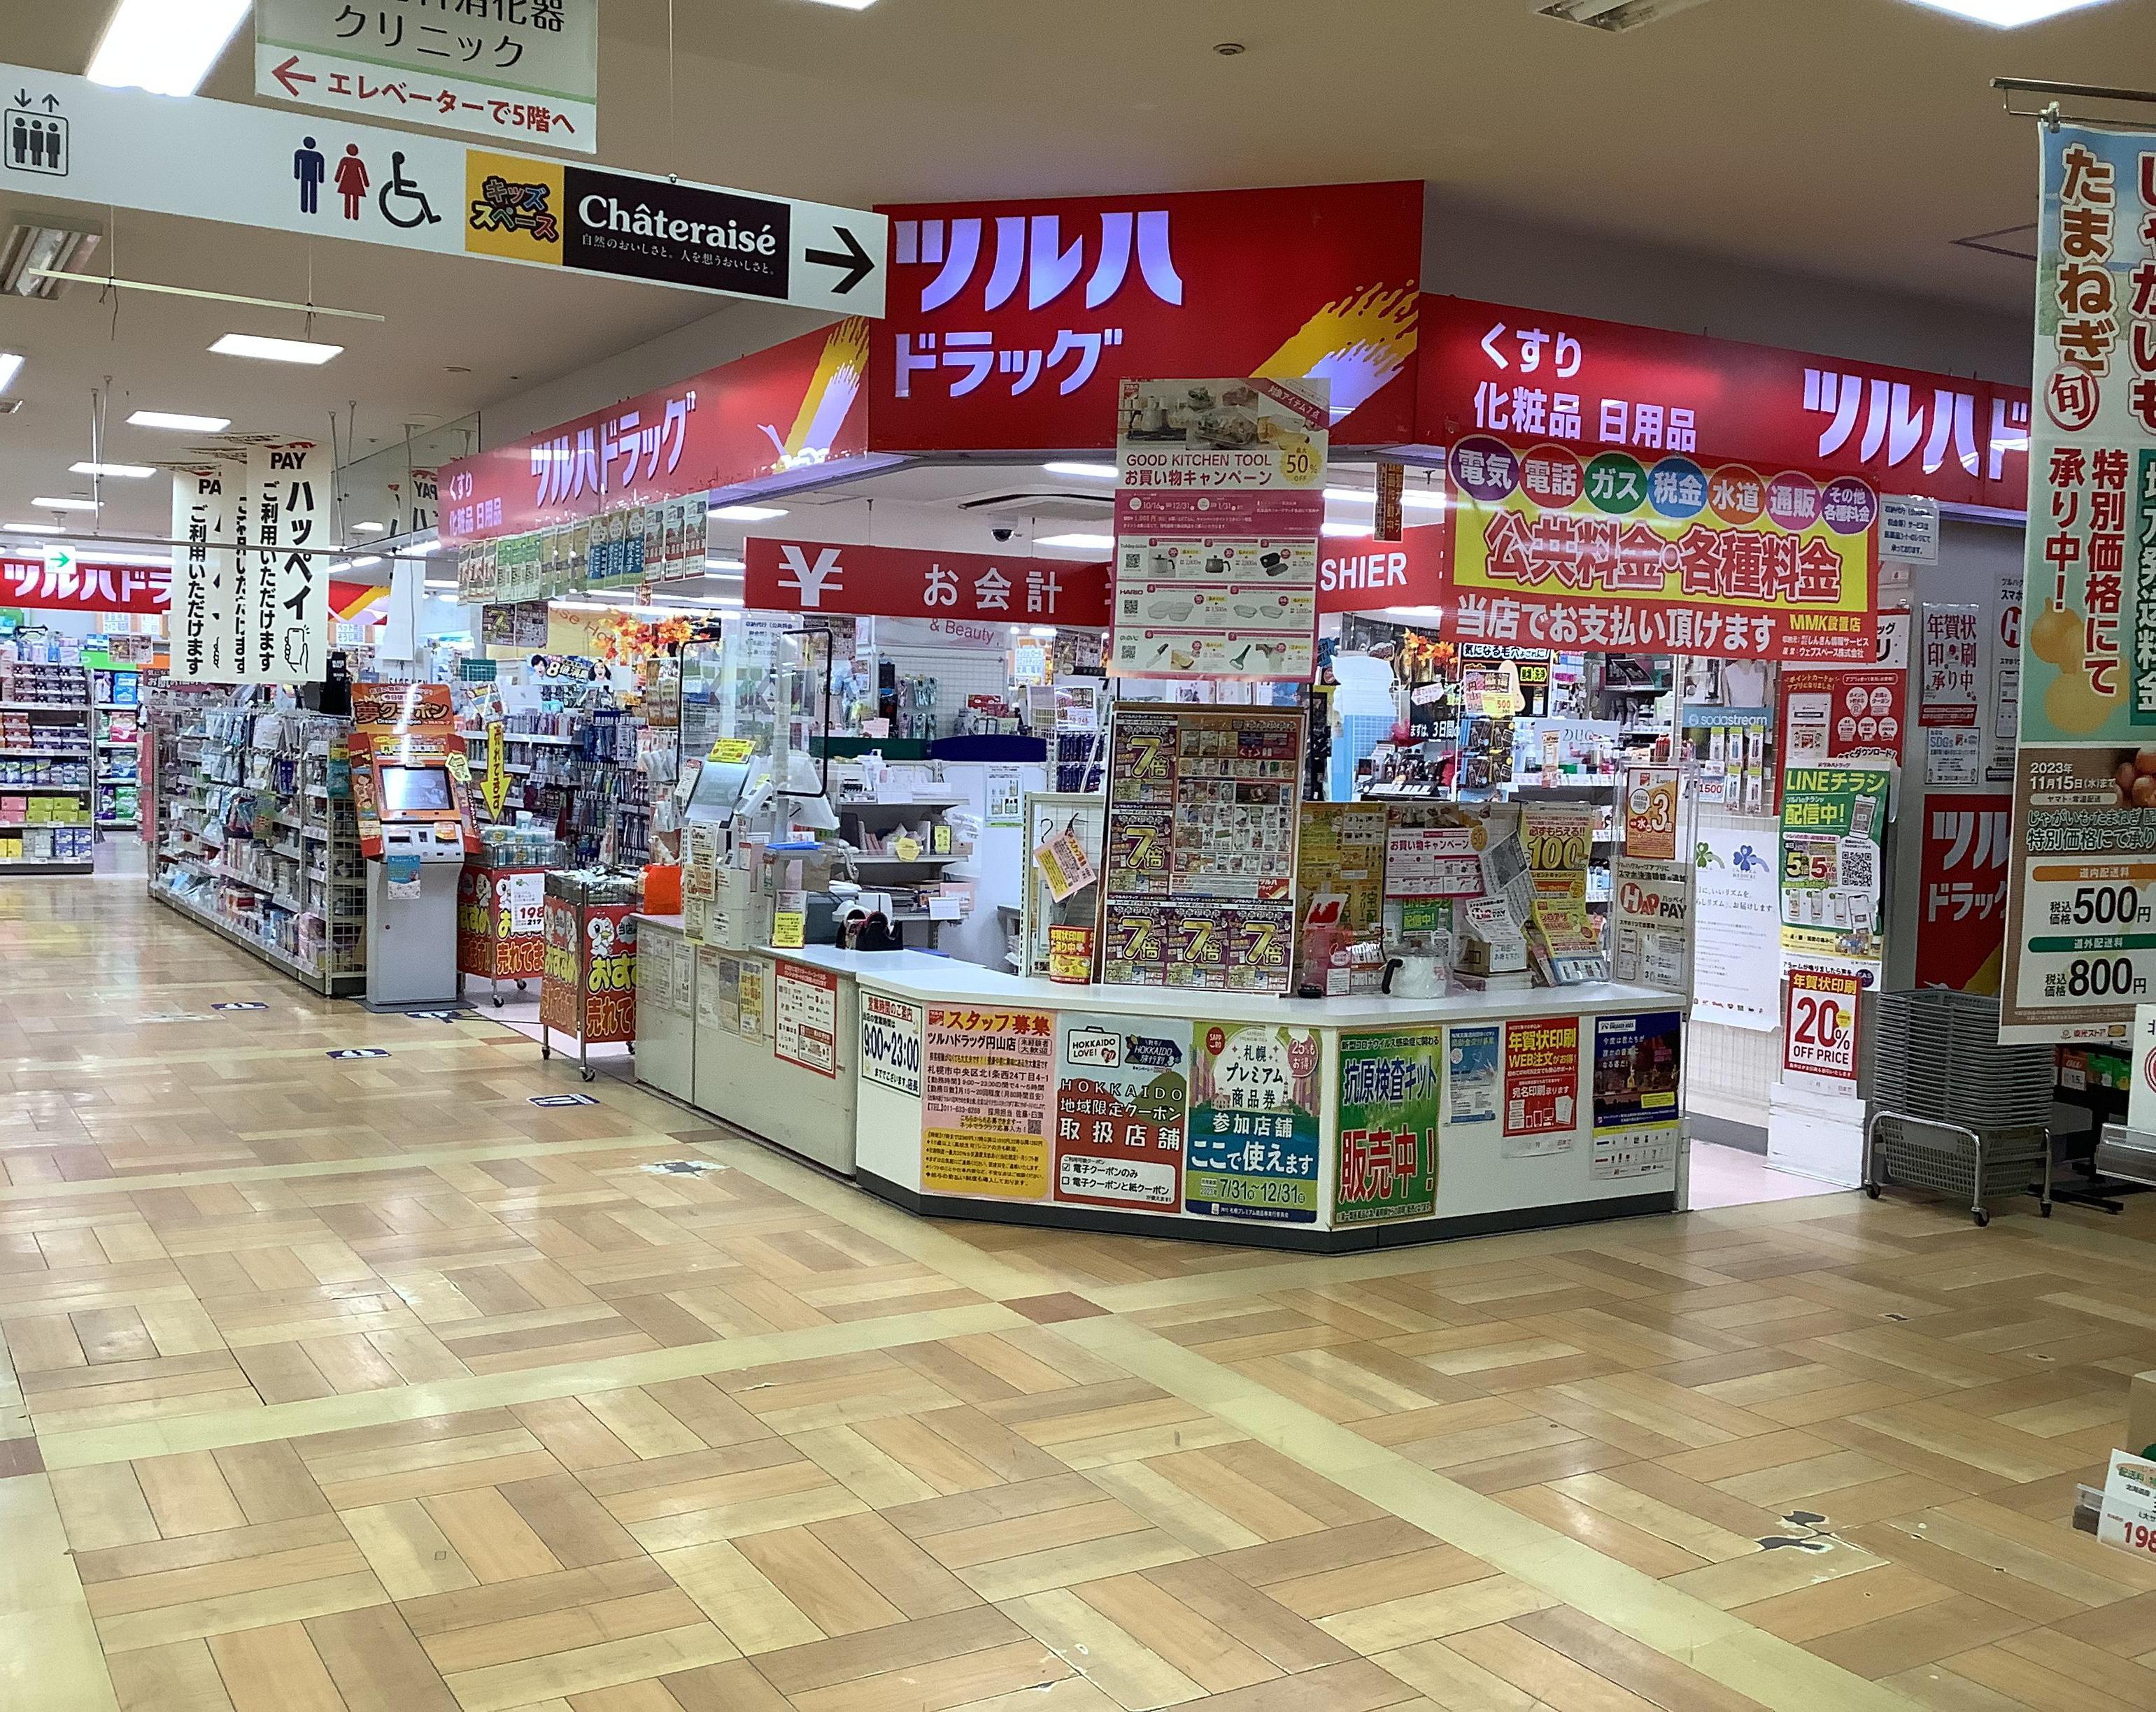 Images ツルハドラッグ 円山店